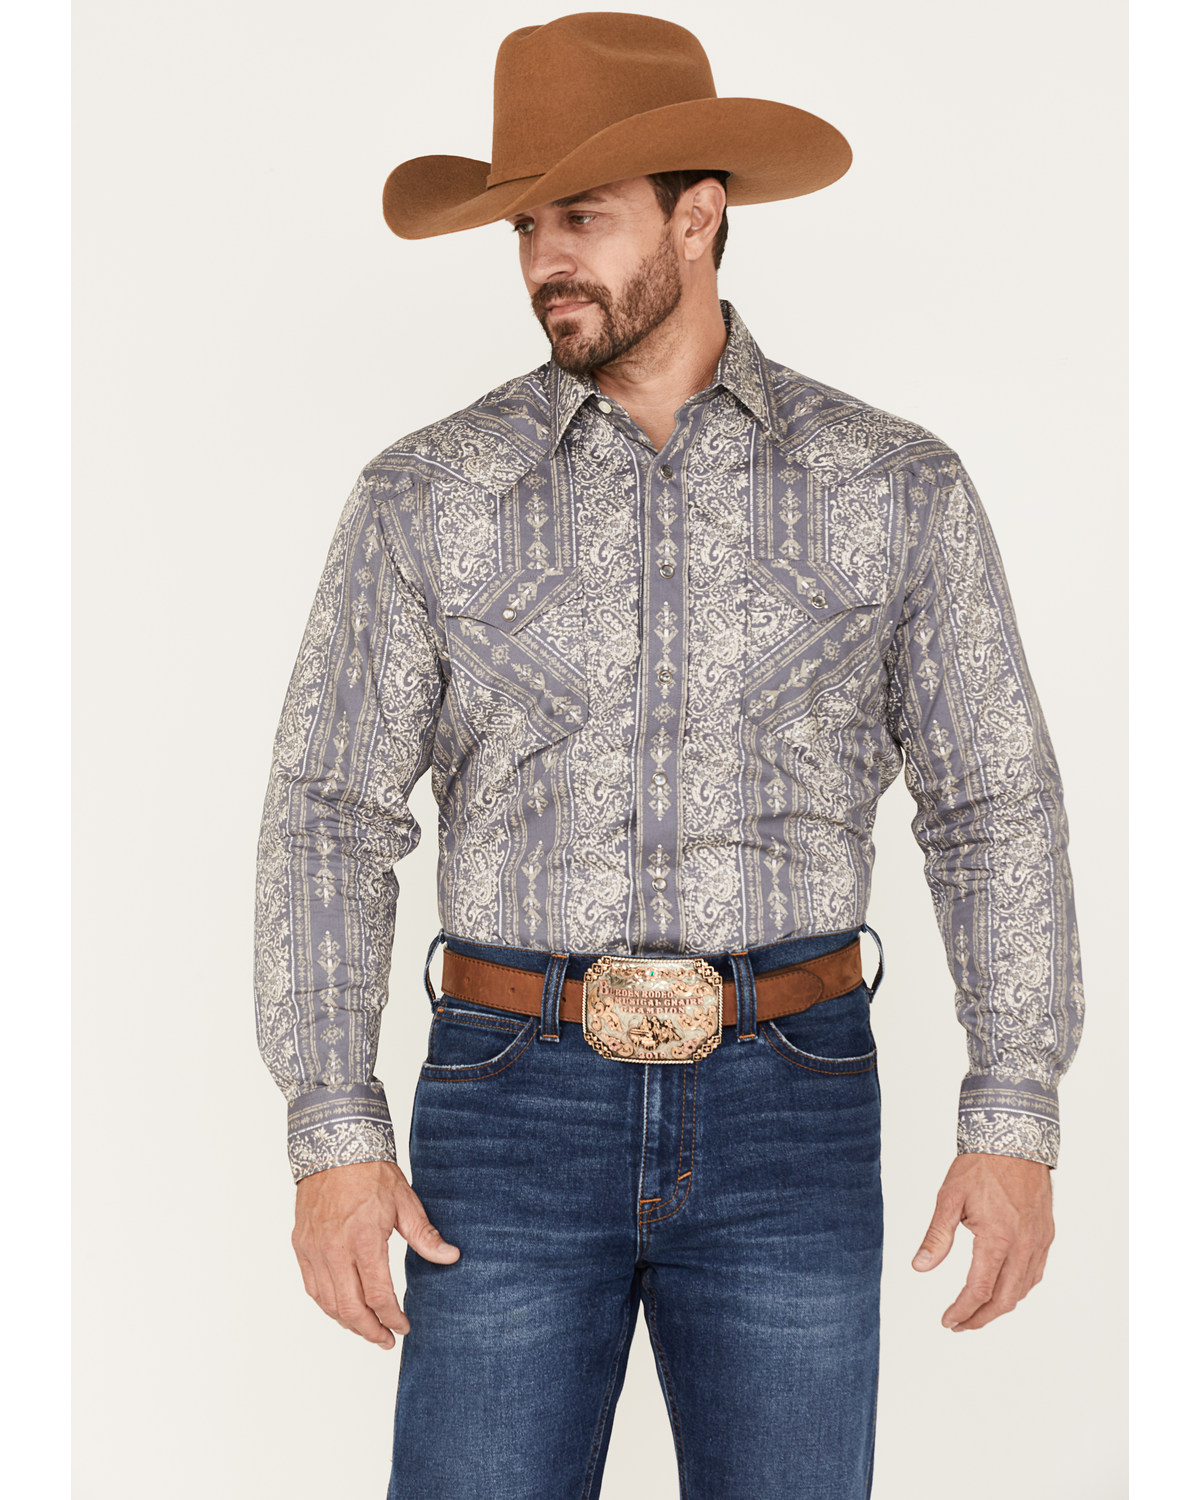 Rough Stock by Panhandle Men's Paisley Striped Long Sleeve Snap Western Shirt